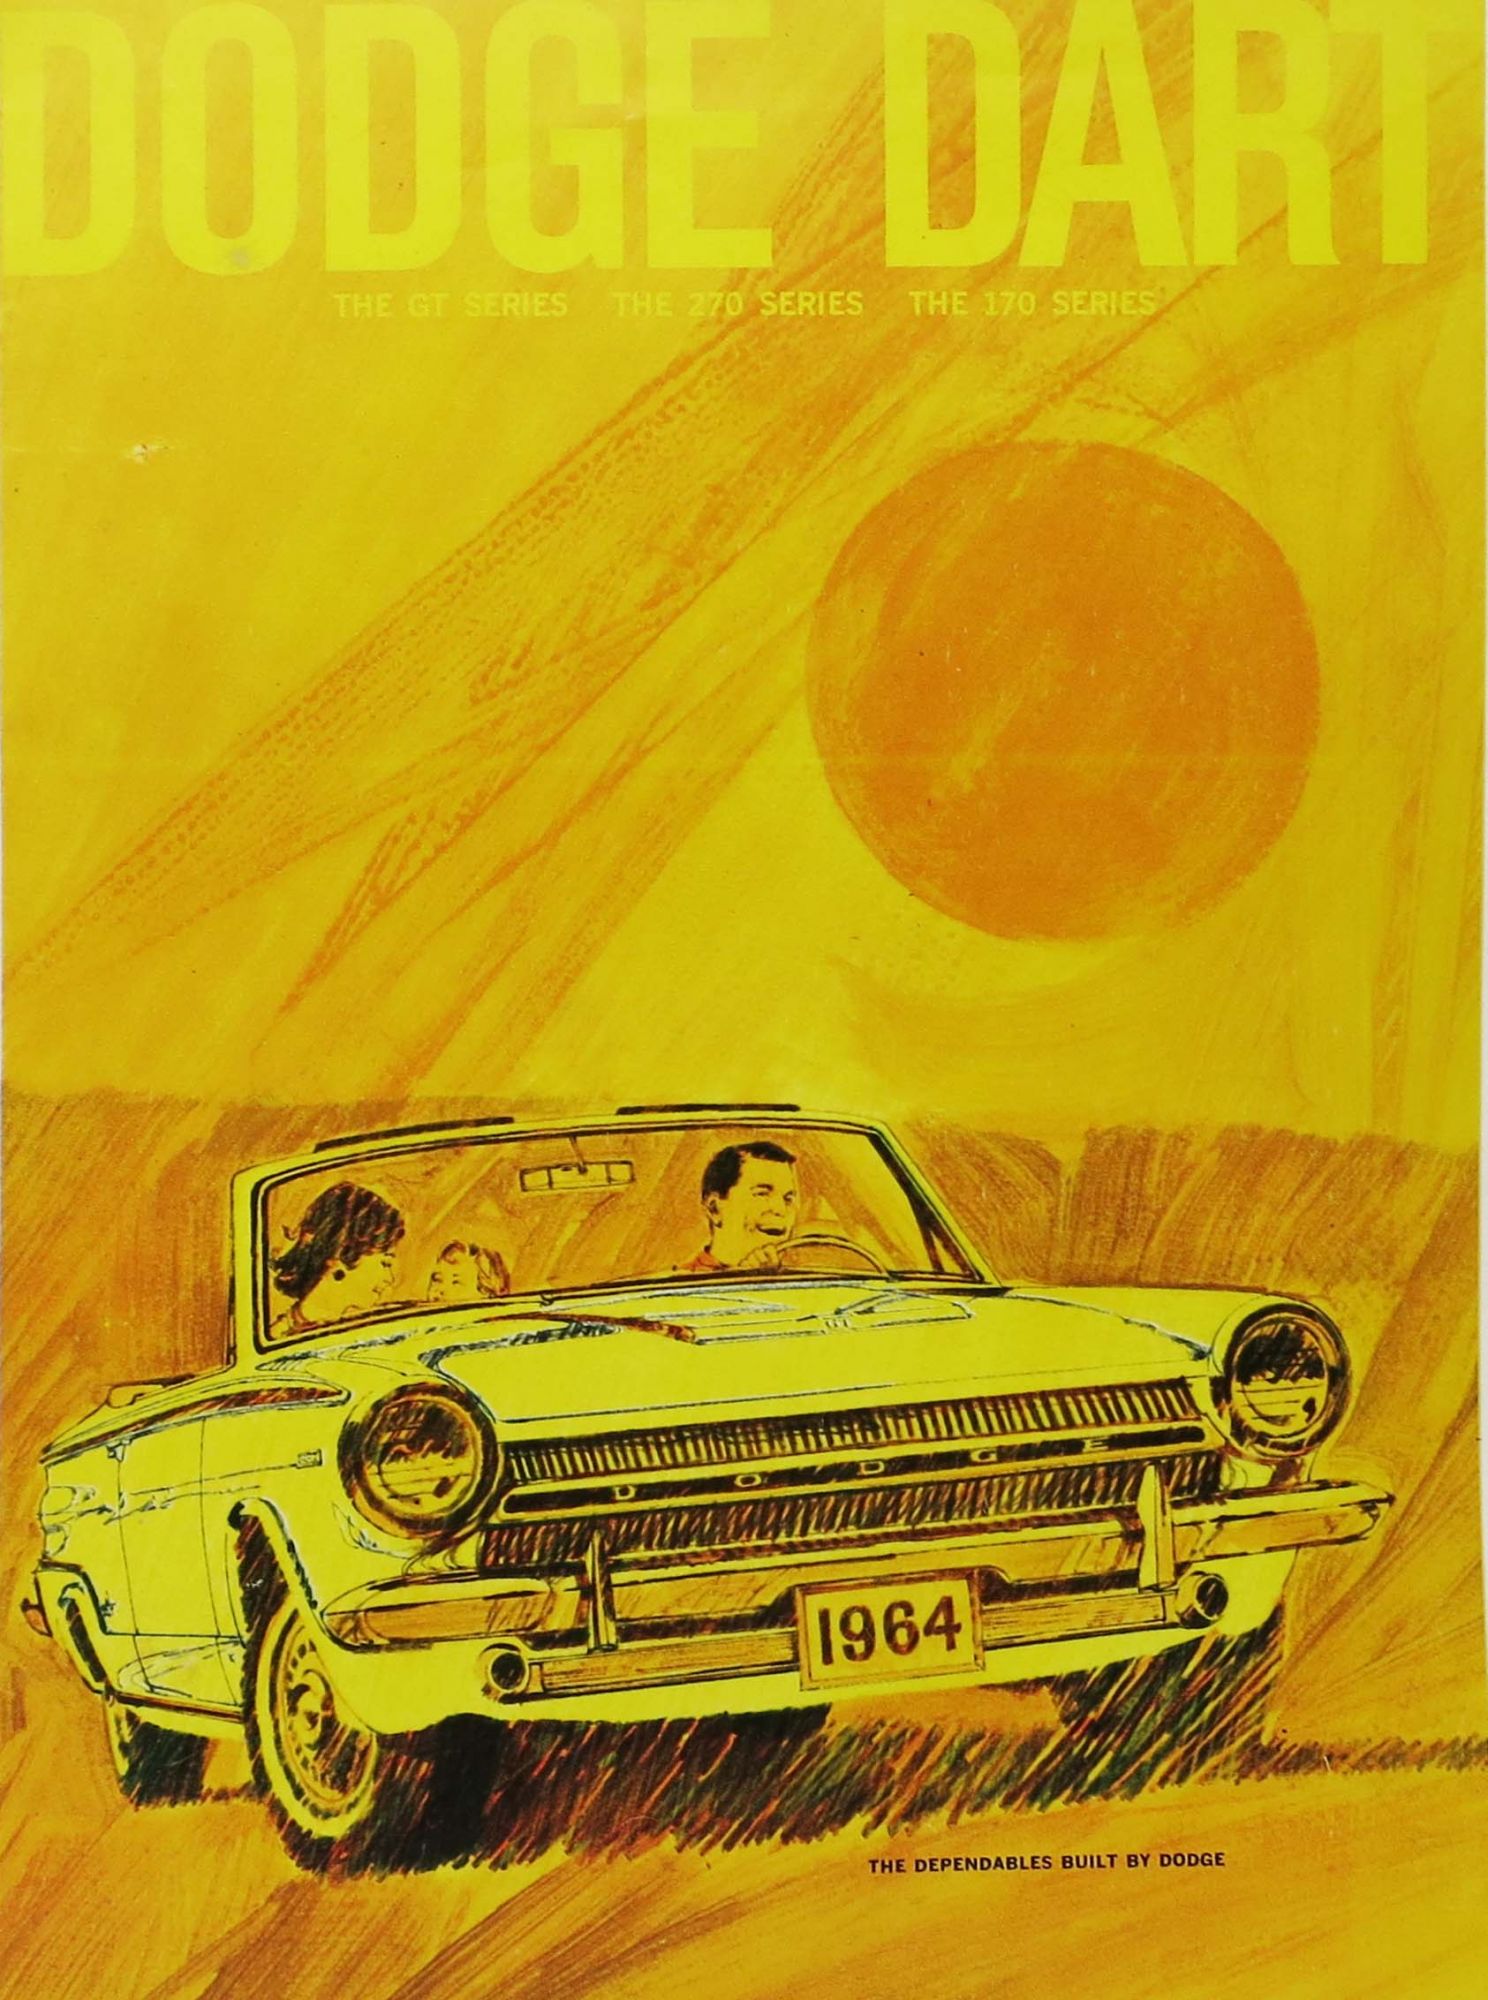 [Dodge - Car Catalog] - DODGE DART CATALOG. Including one slip.; The GT Series. The 270 Series. The 170 Series